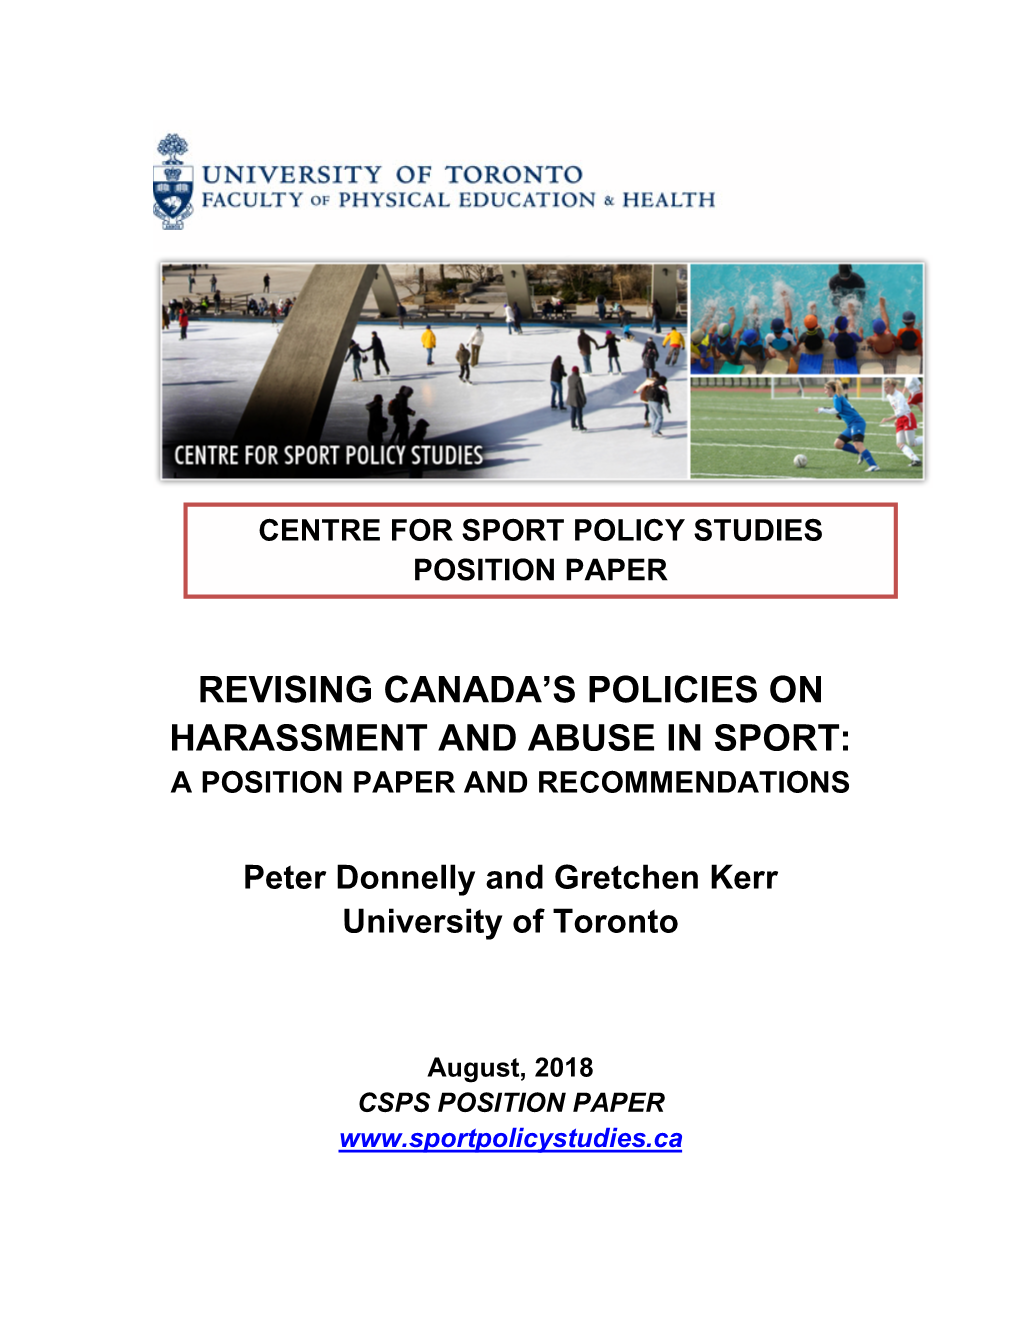 FINAL CSPS Position Paper, Harassment and Abuse in Sport